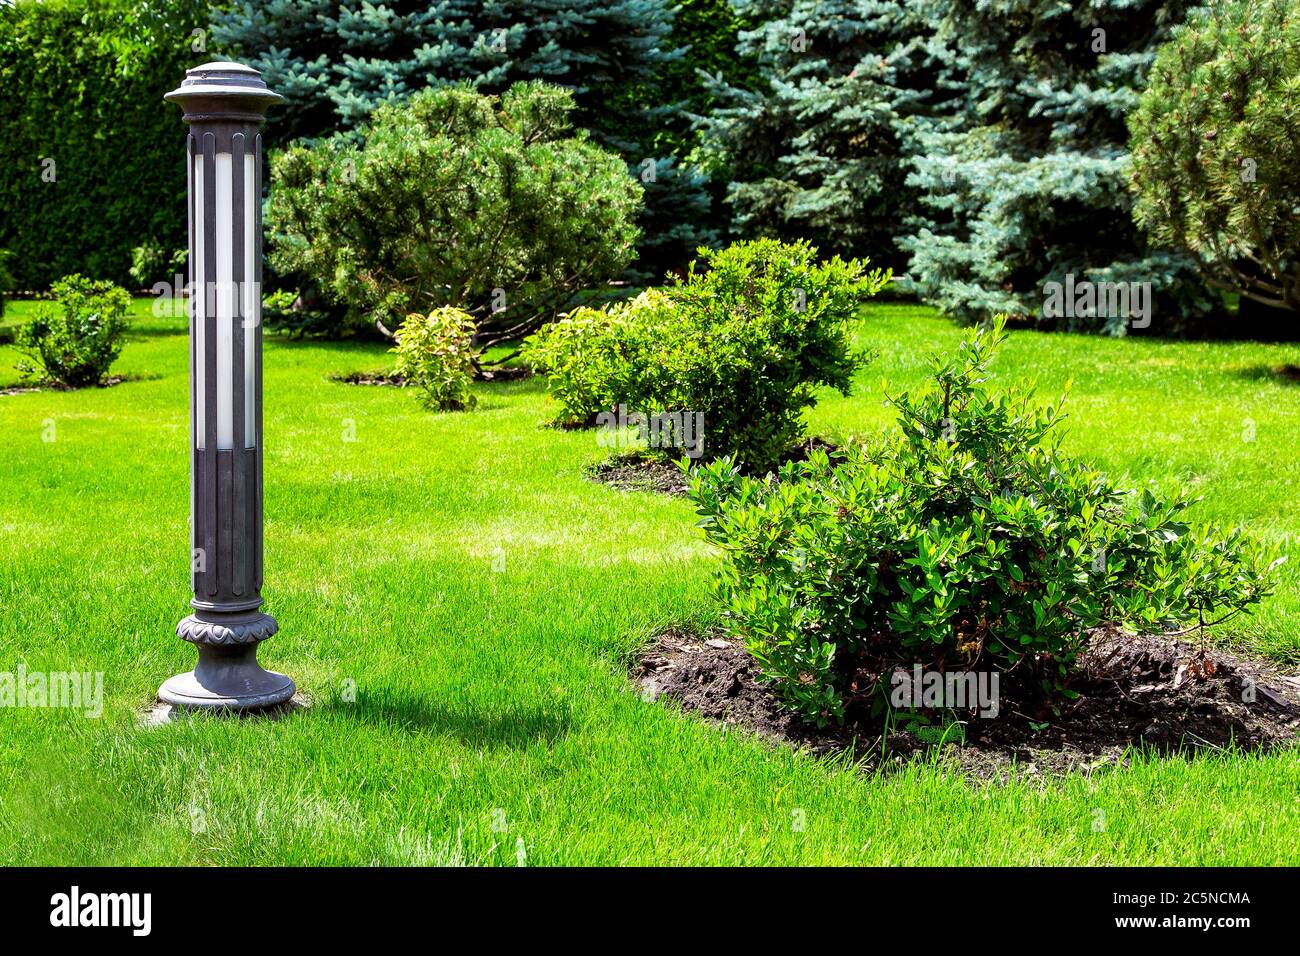 Lighting Ground Lamp Street Mounted on a Green Lawn in a Park. Stock Photo  - Image of friendly, flora: 156425484